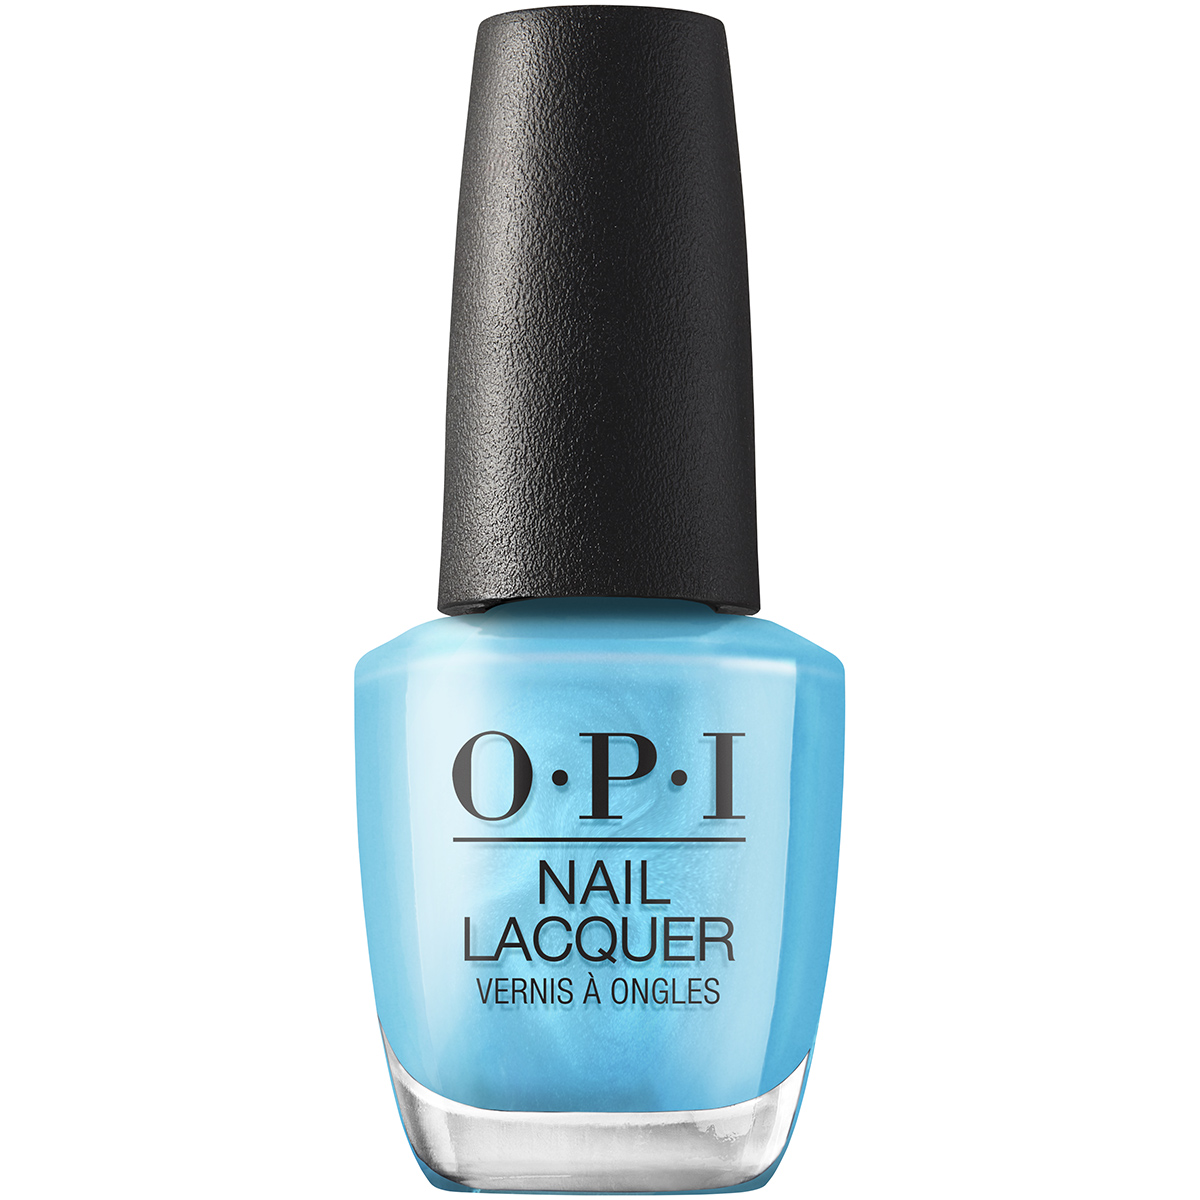 Lac de unghii Nail Lacquer Summer, Surf Naked, 15 ml, Opi